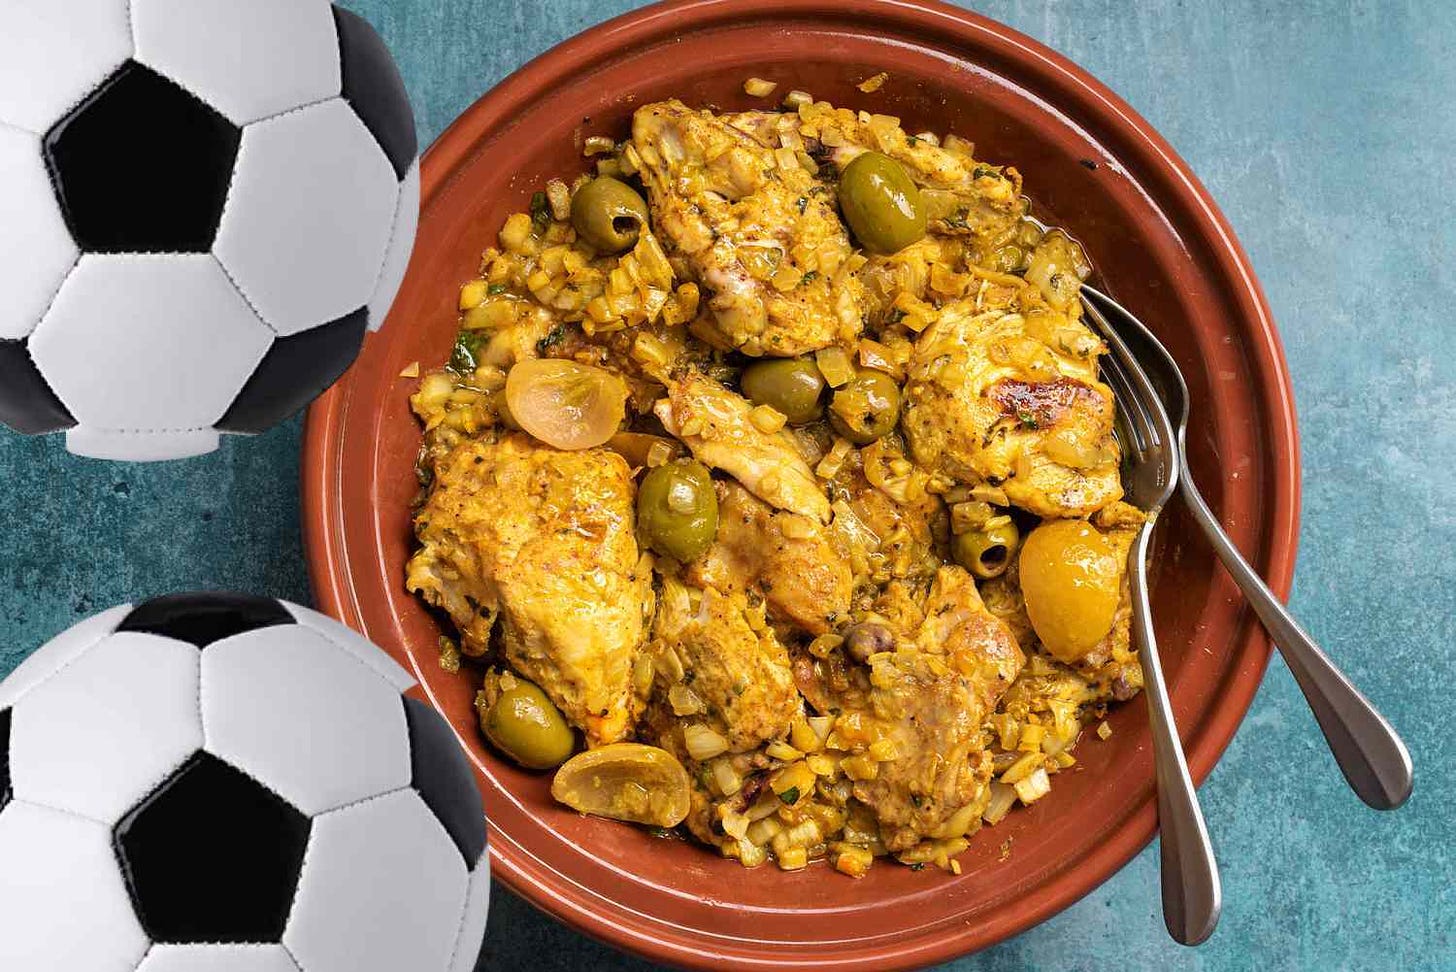 This is the tajine with lemons and olives, not apricots. It is not traditionally served with soccer balls. I added those to make it an “altered for creative purposes” image so the cookbook publisher I stole the rest of the picture from can’t sue me. I considered photoshopping in some apricots too, but my lawyer and my culinary consultant both advised against it.